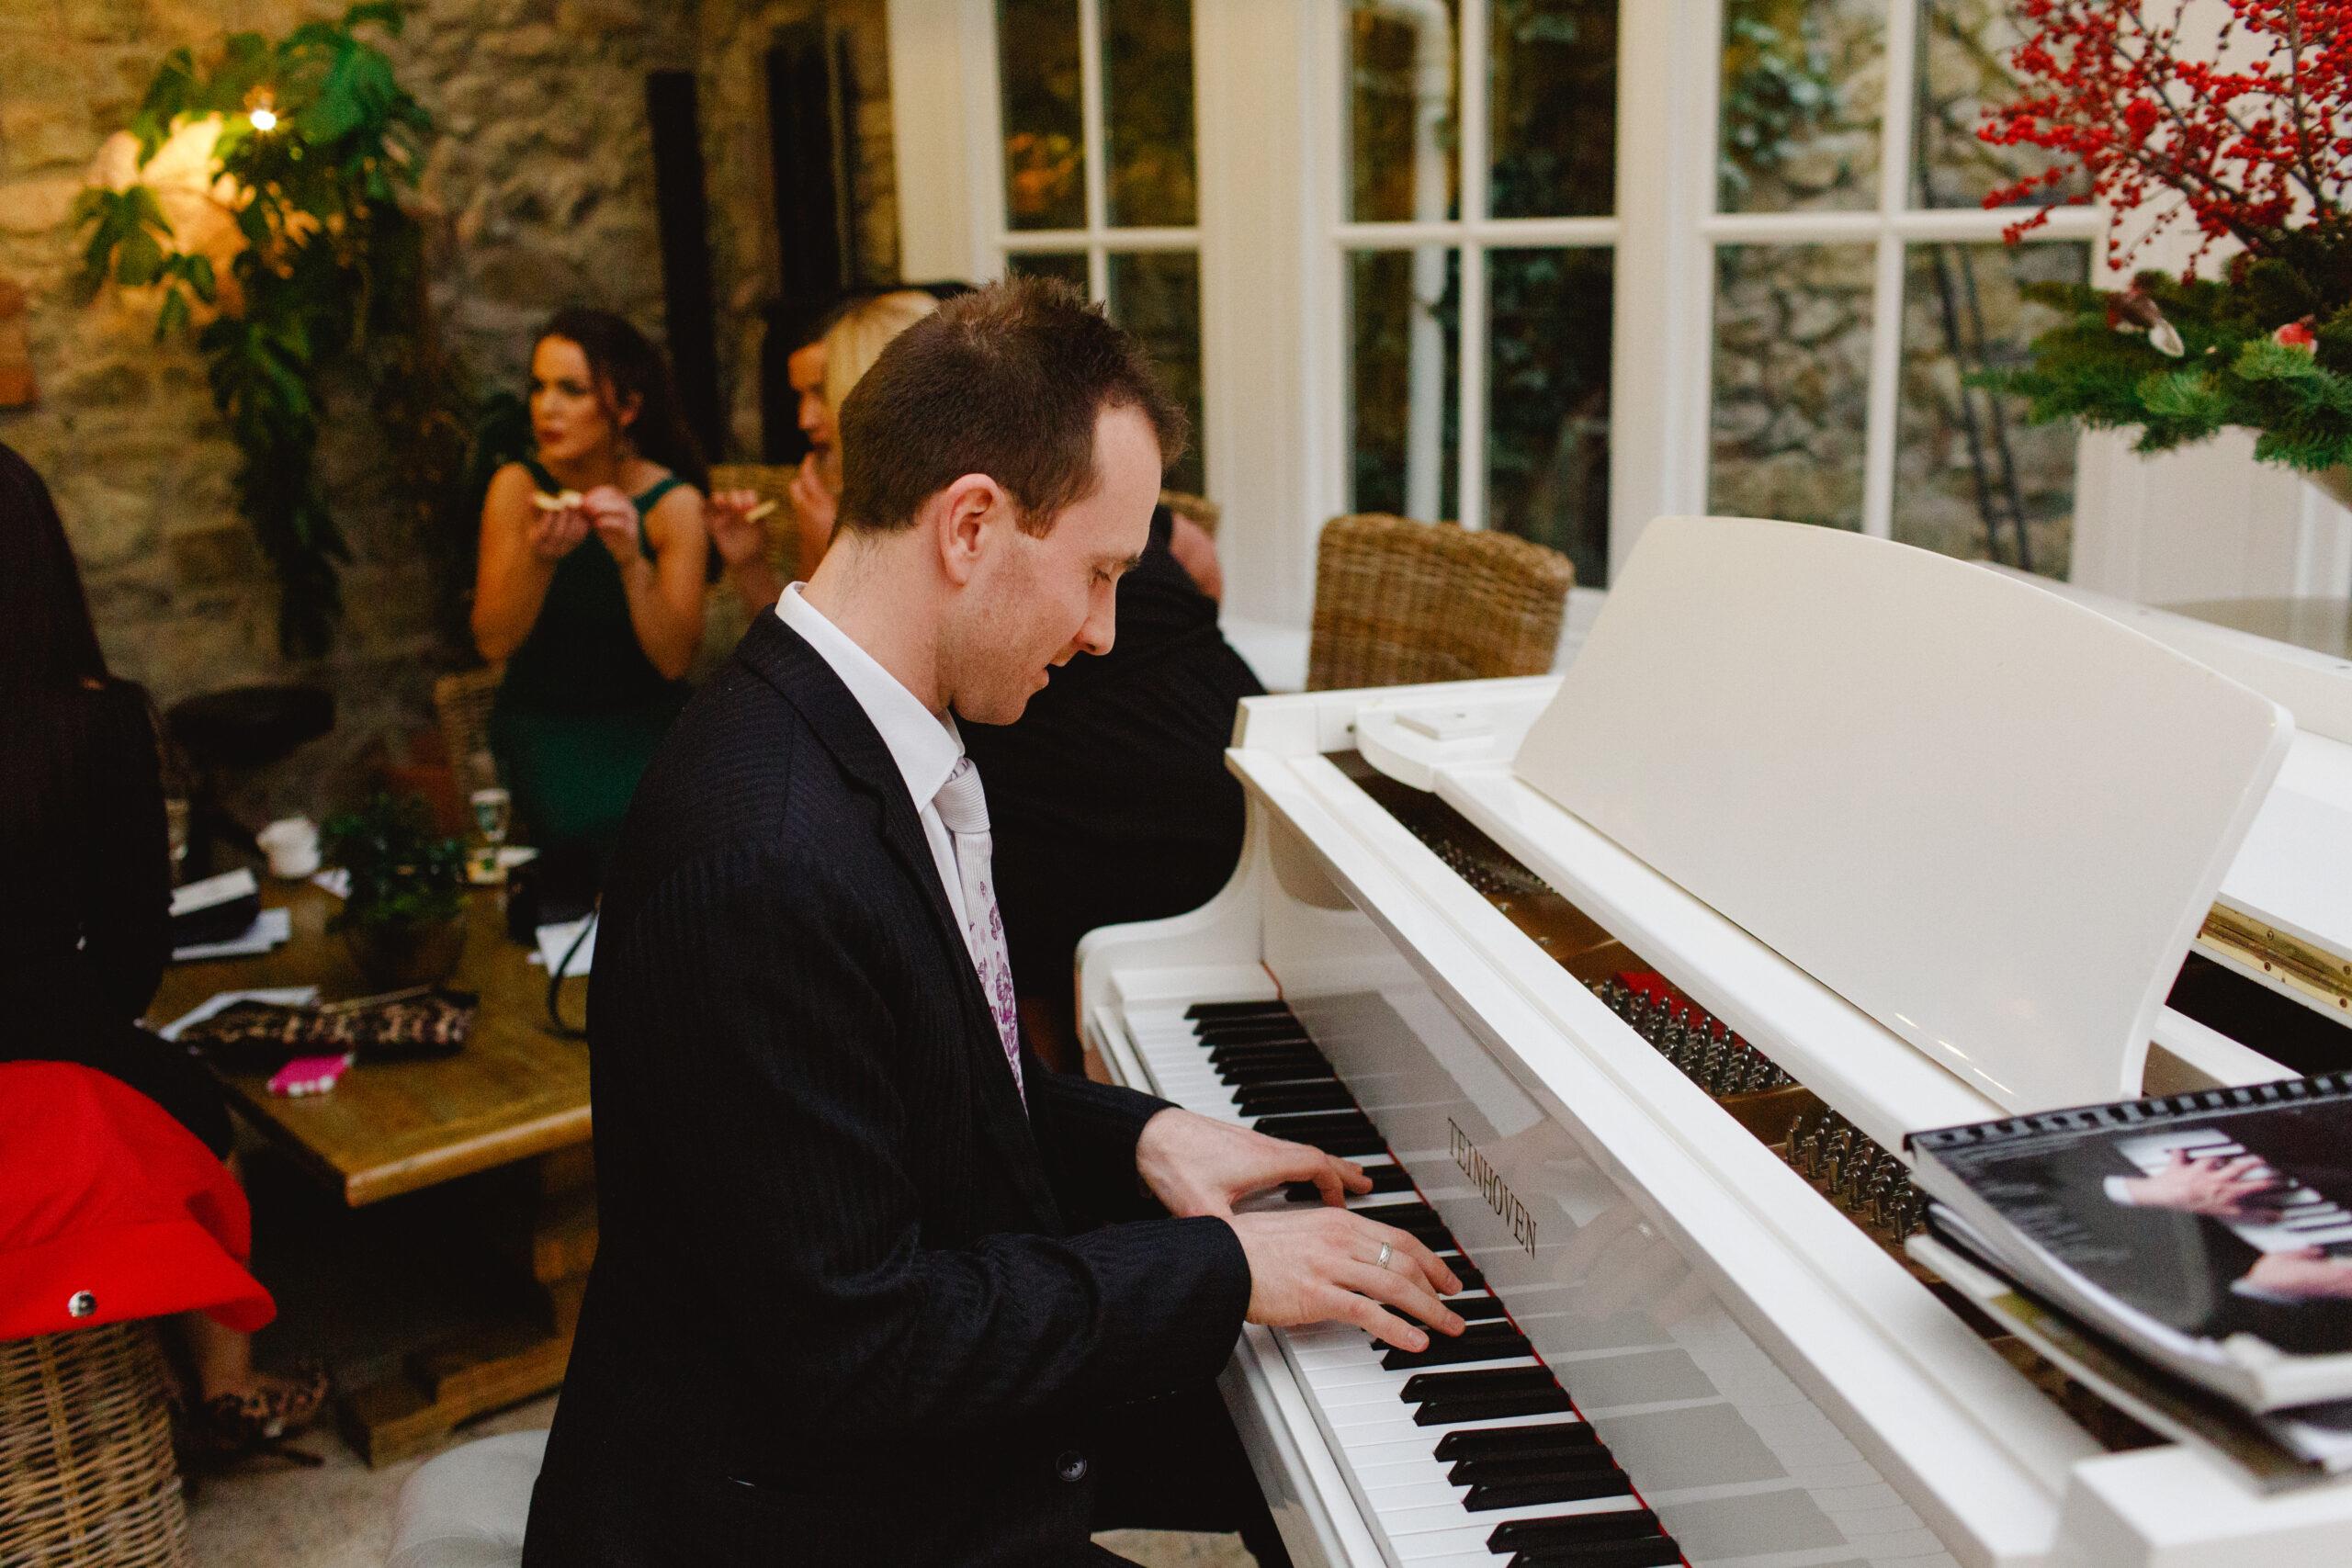 Joe Kenny playing on a white baby grand piano at a wedding drinks reception in Ballymagarvey Village, Co. Meath